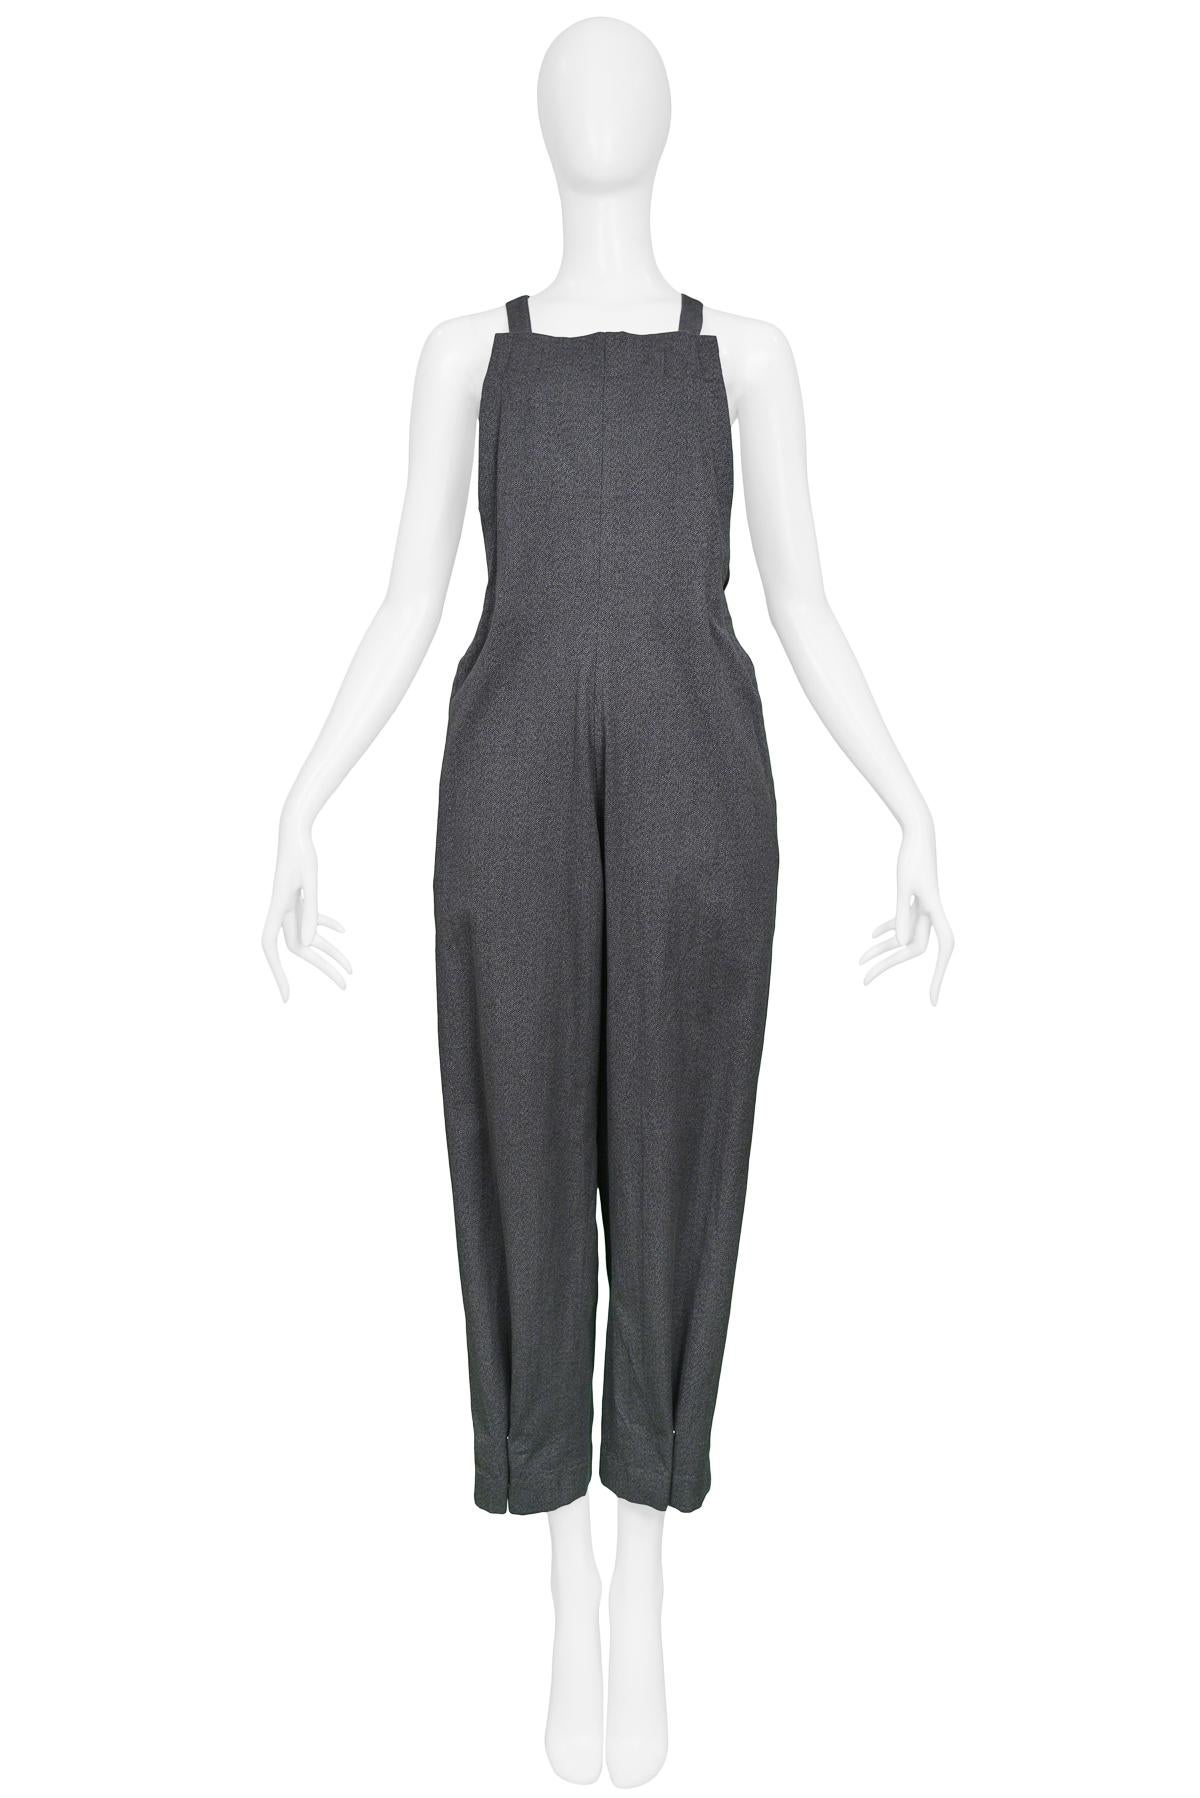 Resurrection Vintage is excited to present a vintage Yohji Yamamoto Jumpsuit featuring crossed adjustable straps, back pockets, and pleats at the ankles.

Yohji Yamamoto
Size: Small
Fabric: Cotton
Excellent Vintage Condition 
Authenticity Guaranteed 